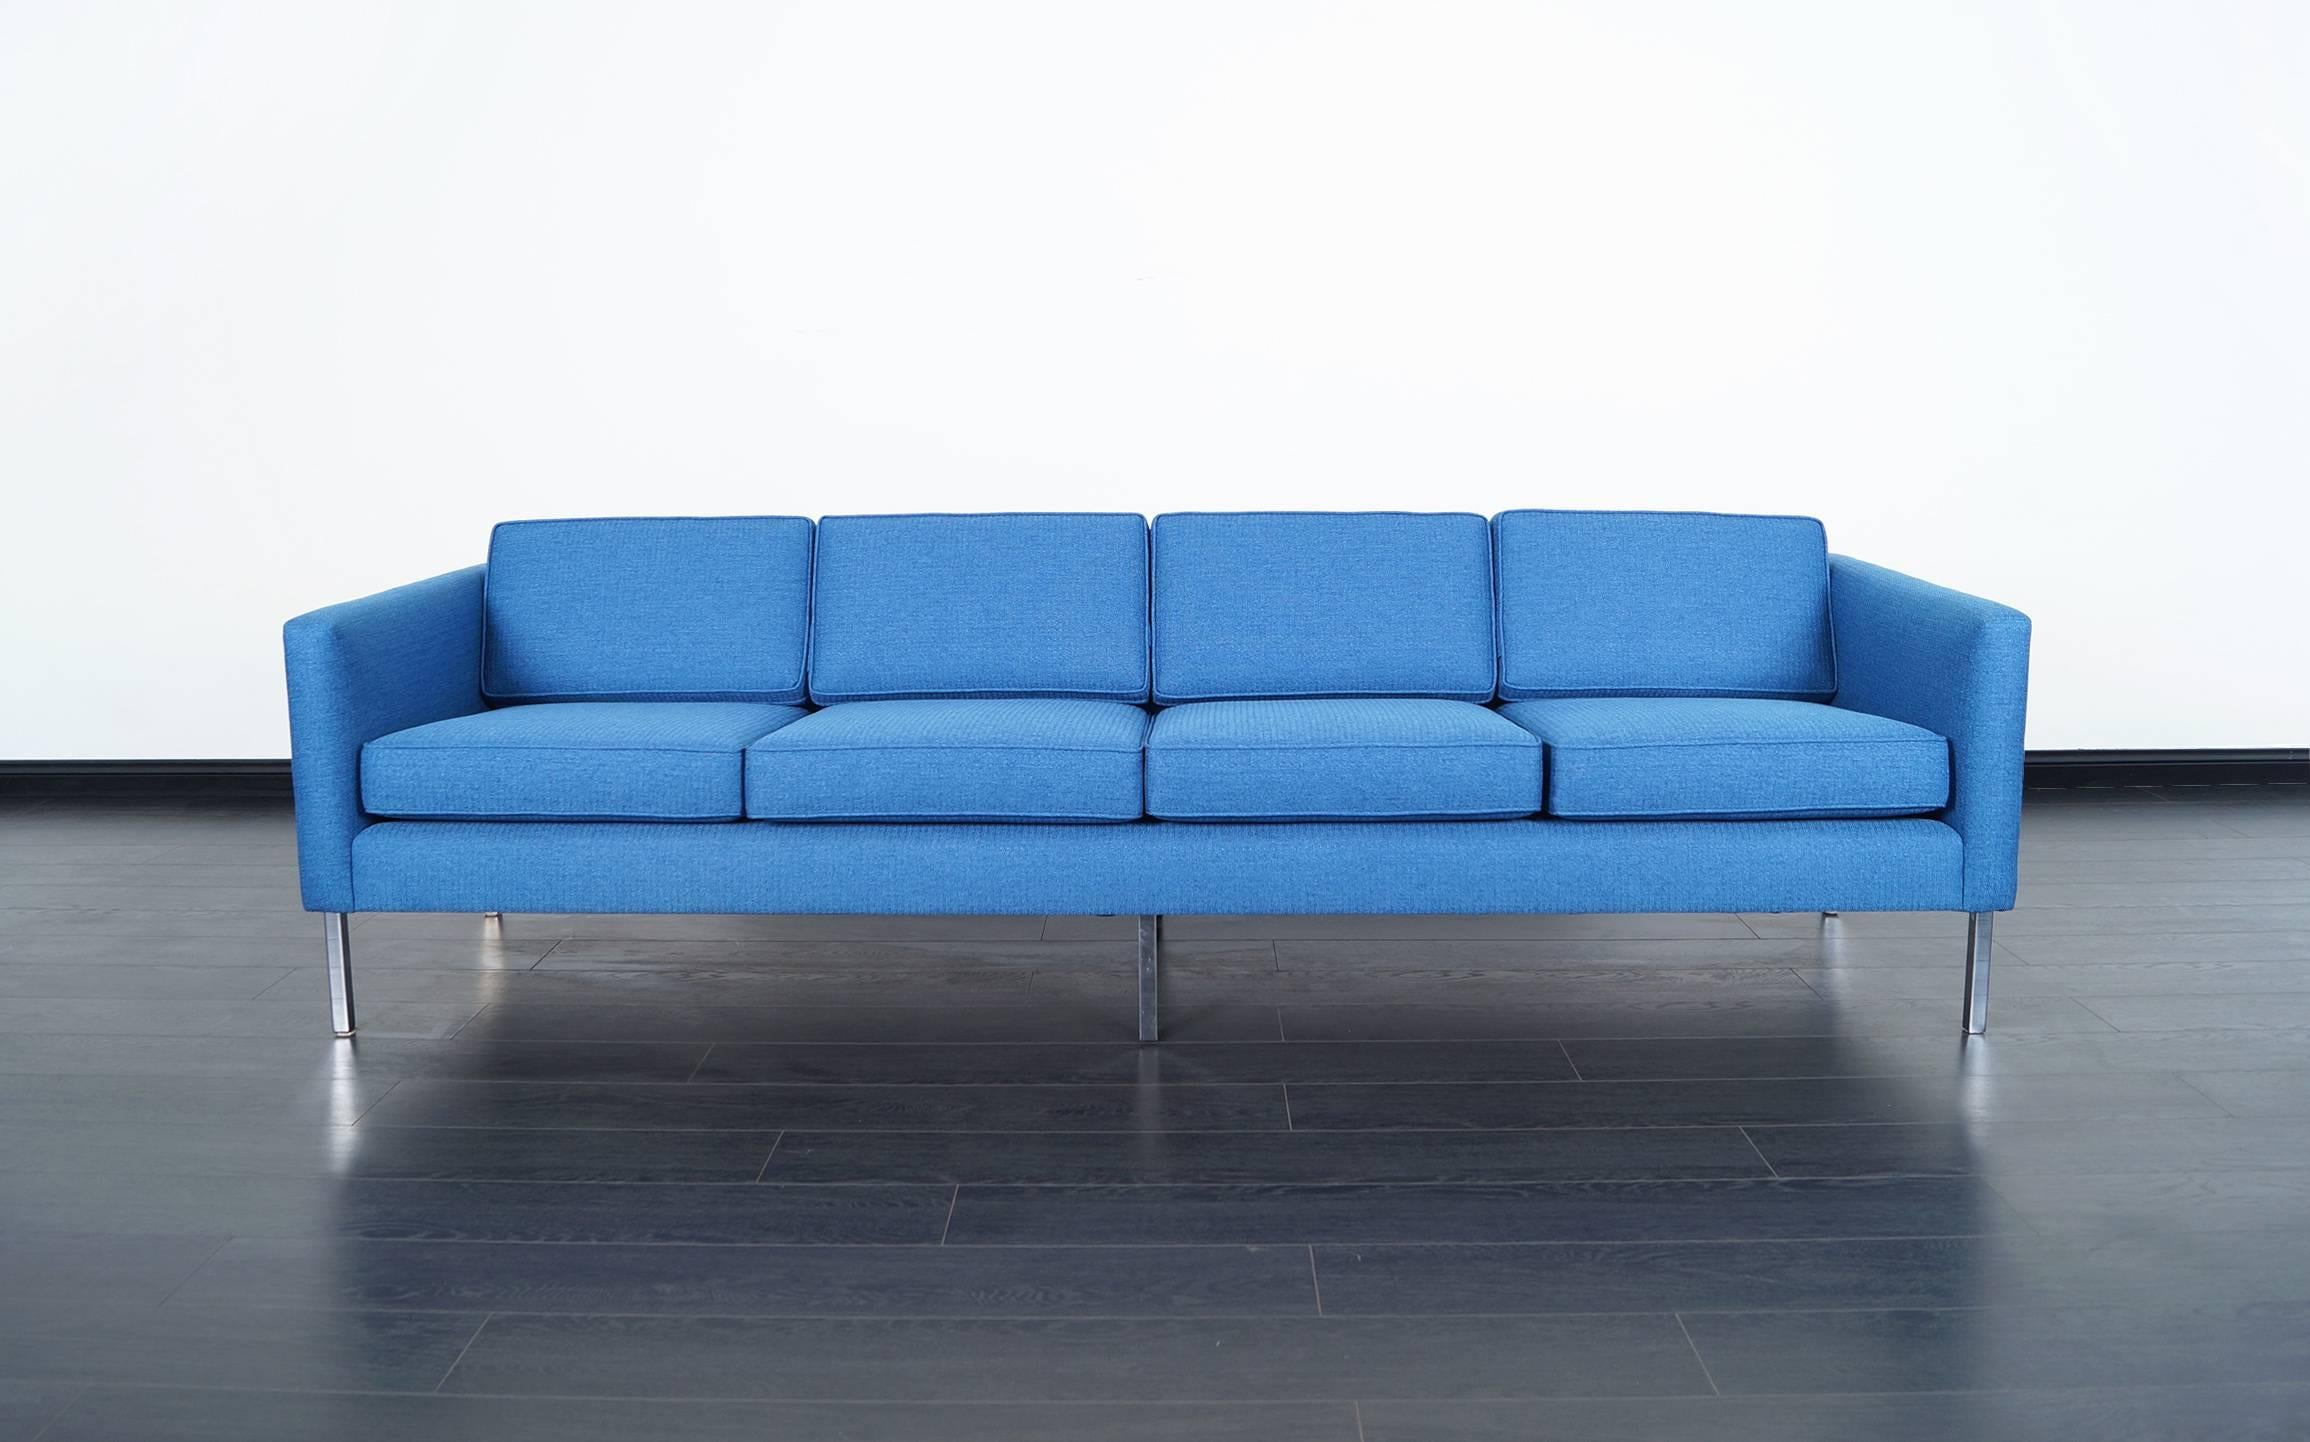 Mid-Century Modern chrome sofa in the manner of Harvey Probber, circa 1960s. Professionally reupholstered in a beautiful Olympic blue color by our team of expert craftsmen. It sits on four chrome legs that blend perfectly with the structure of the